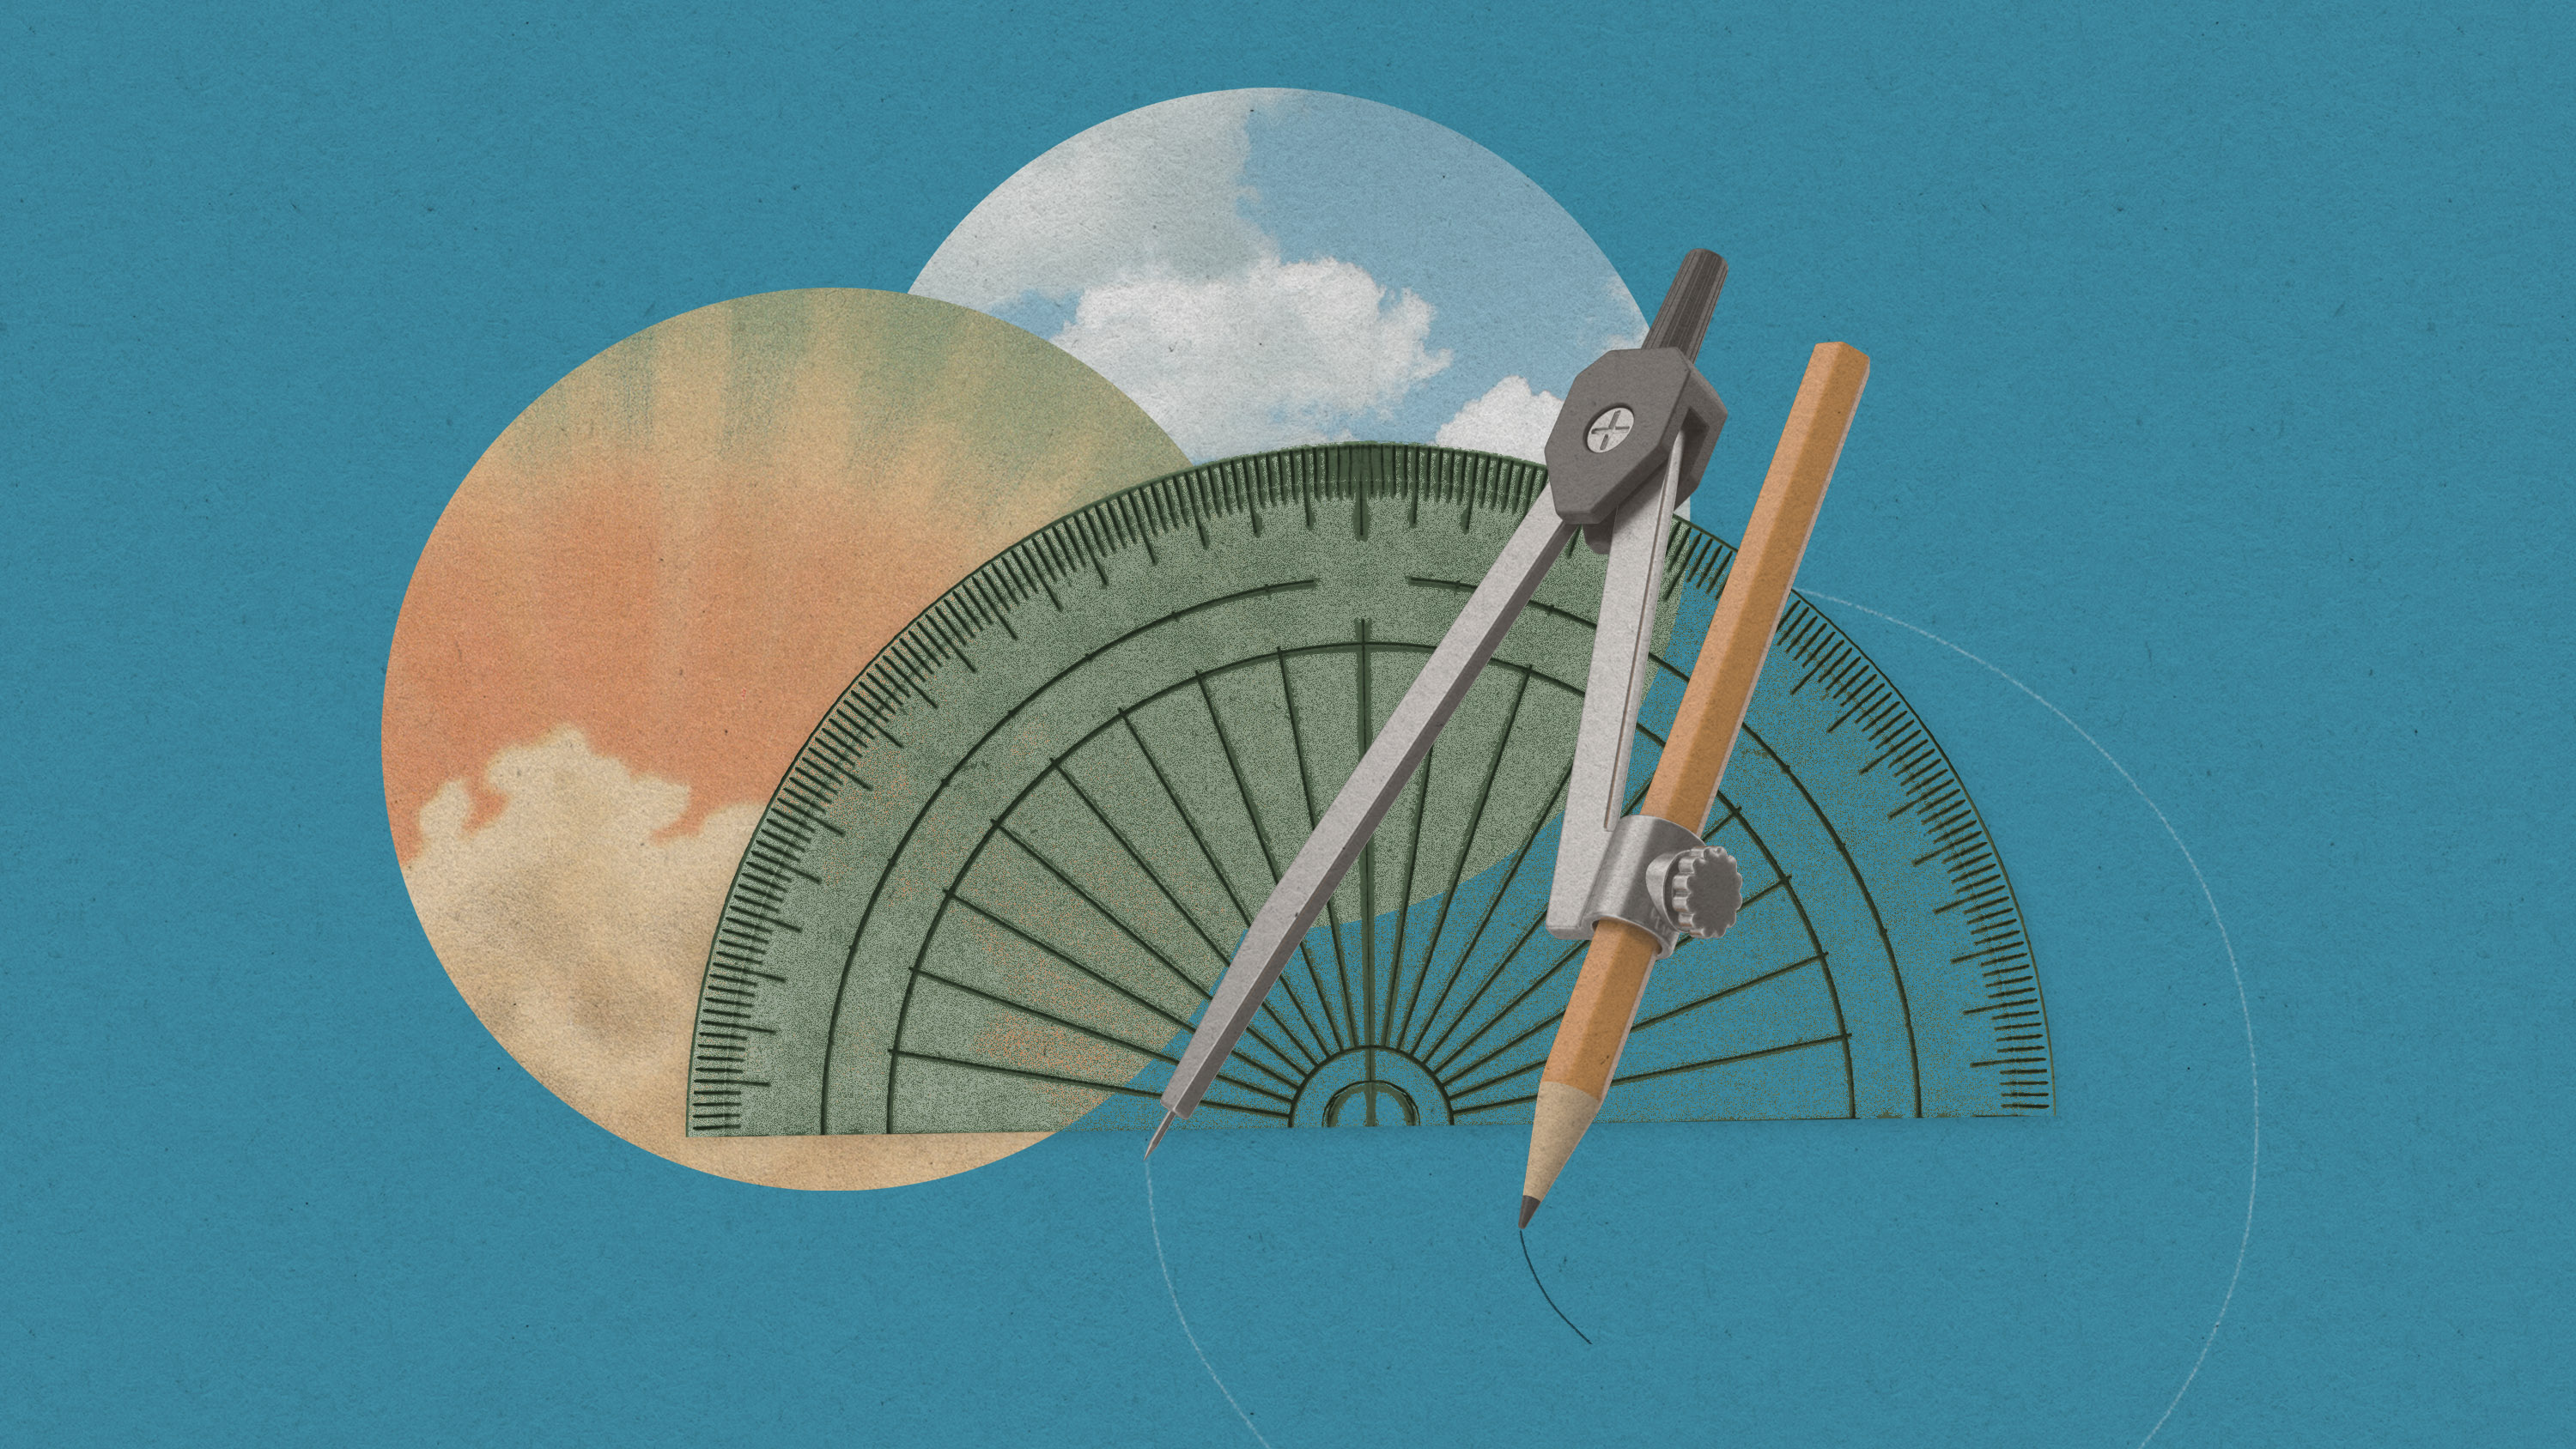 compass and protractor with circles of cloudy skies